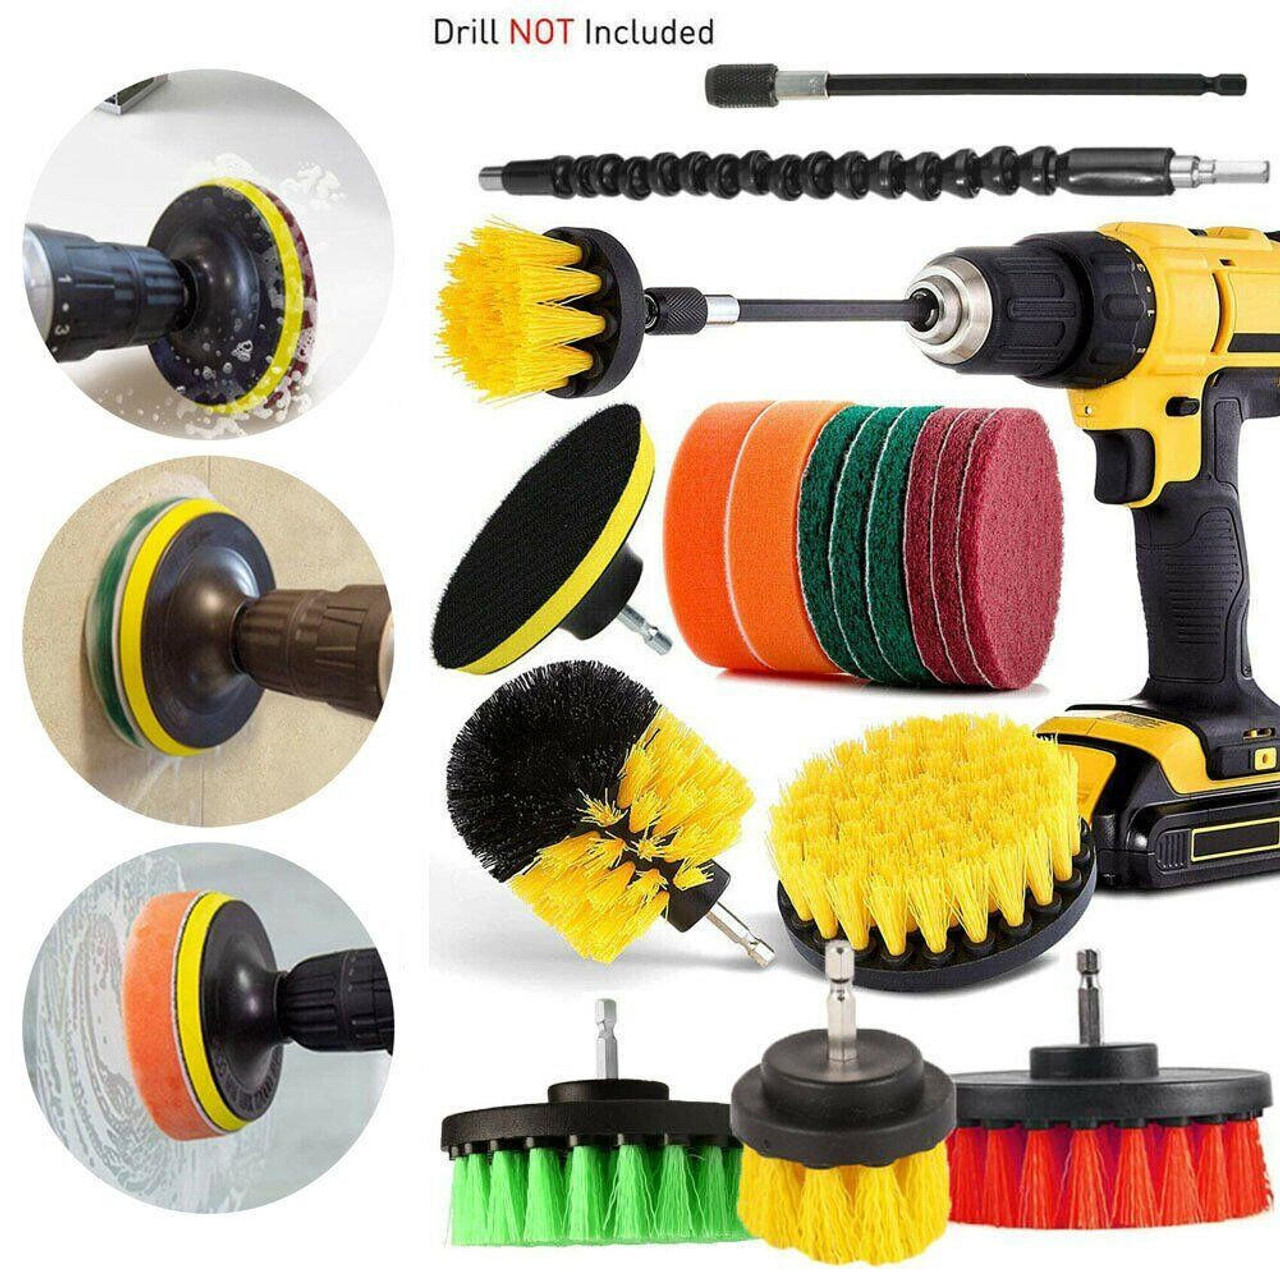 https://cdn11.bigcommerce.com/s-zrh8tkpr8d/images/stencil/1280x1280/products/10076/31674/1221-pcs-electric-drill-brush-attachment-set-cleaning-kit-power-scrubber-pads__88739.1675296151.jpg?c=2&imbypass=on